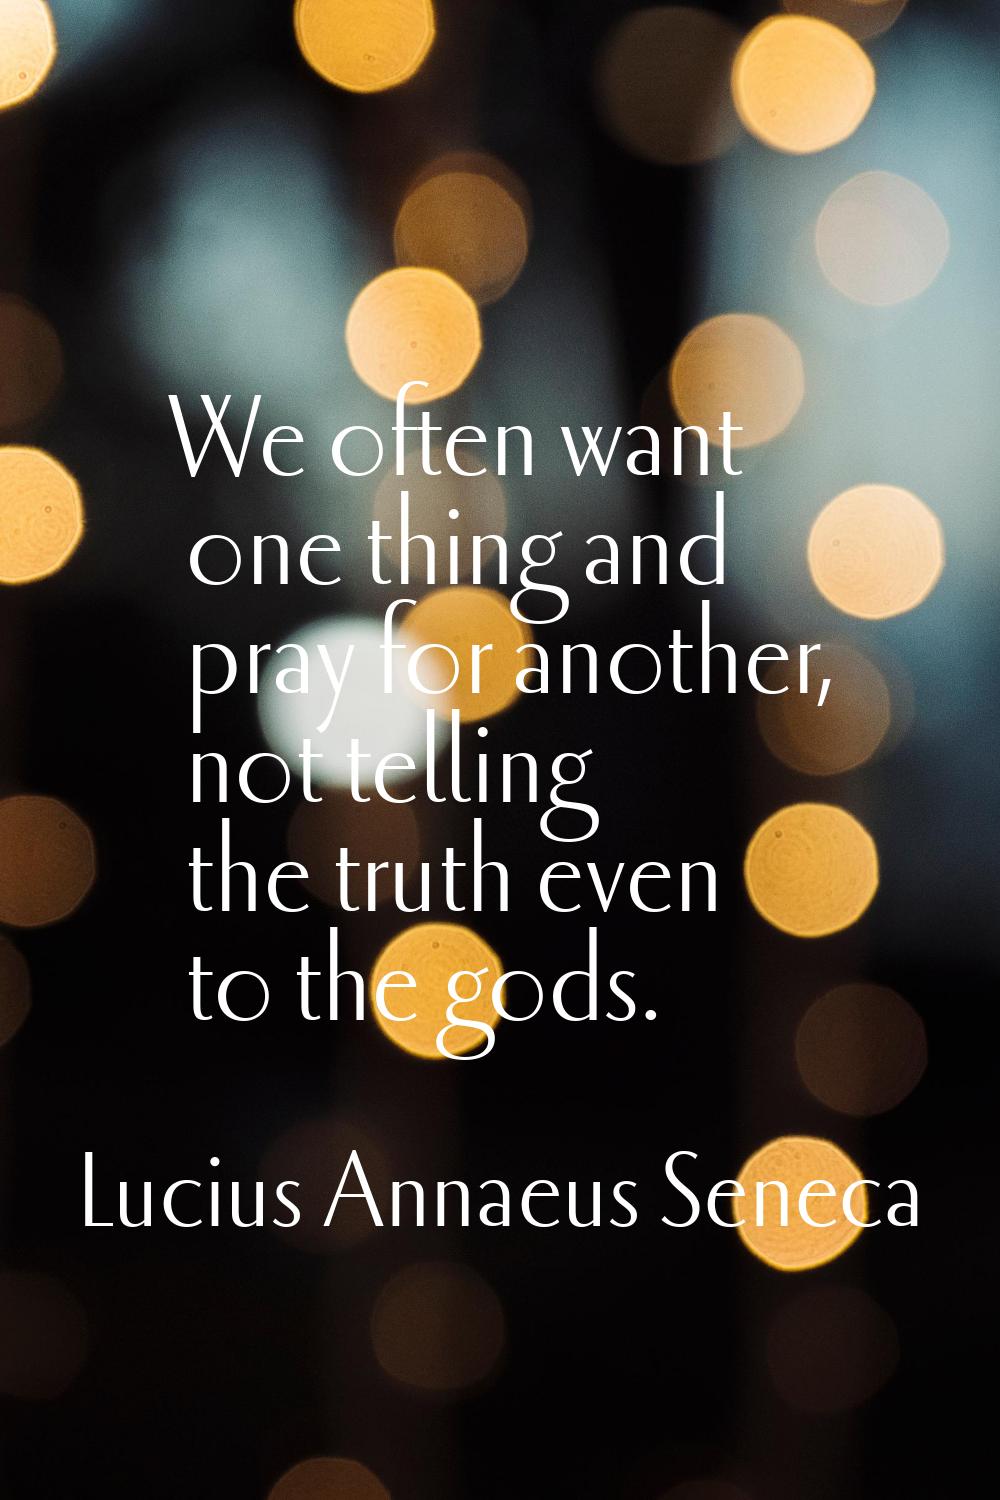 We often want one thing and pray for another, not telling the truth even to the gods.